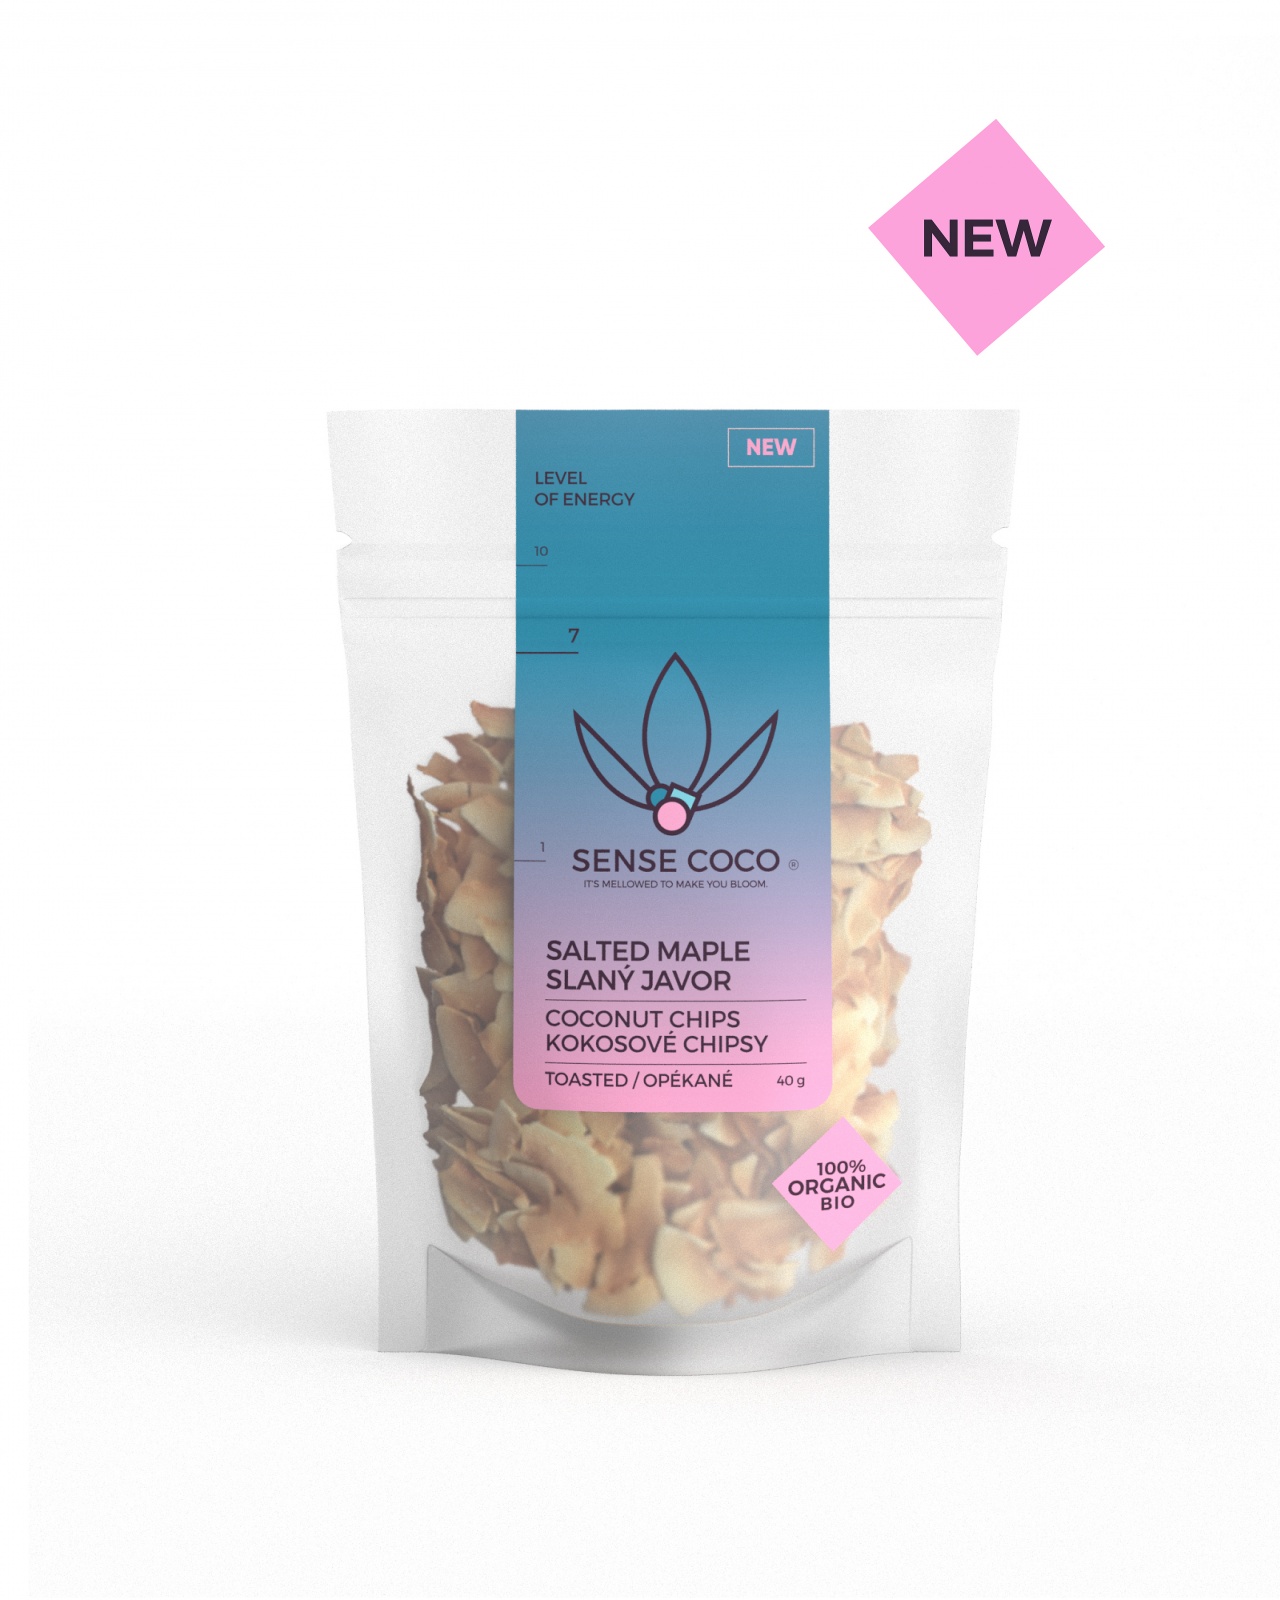 Salted maple BIO coconut chips